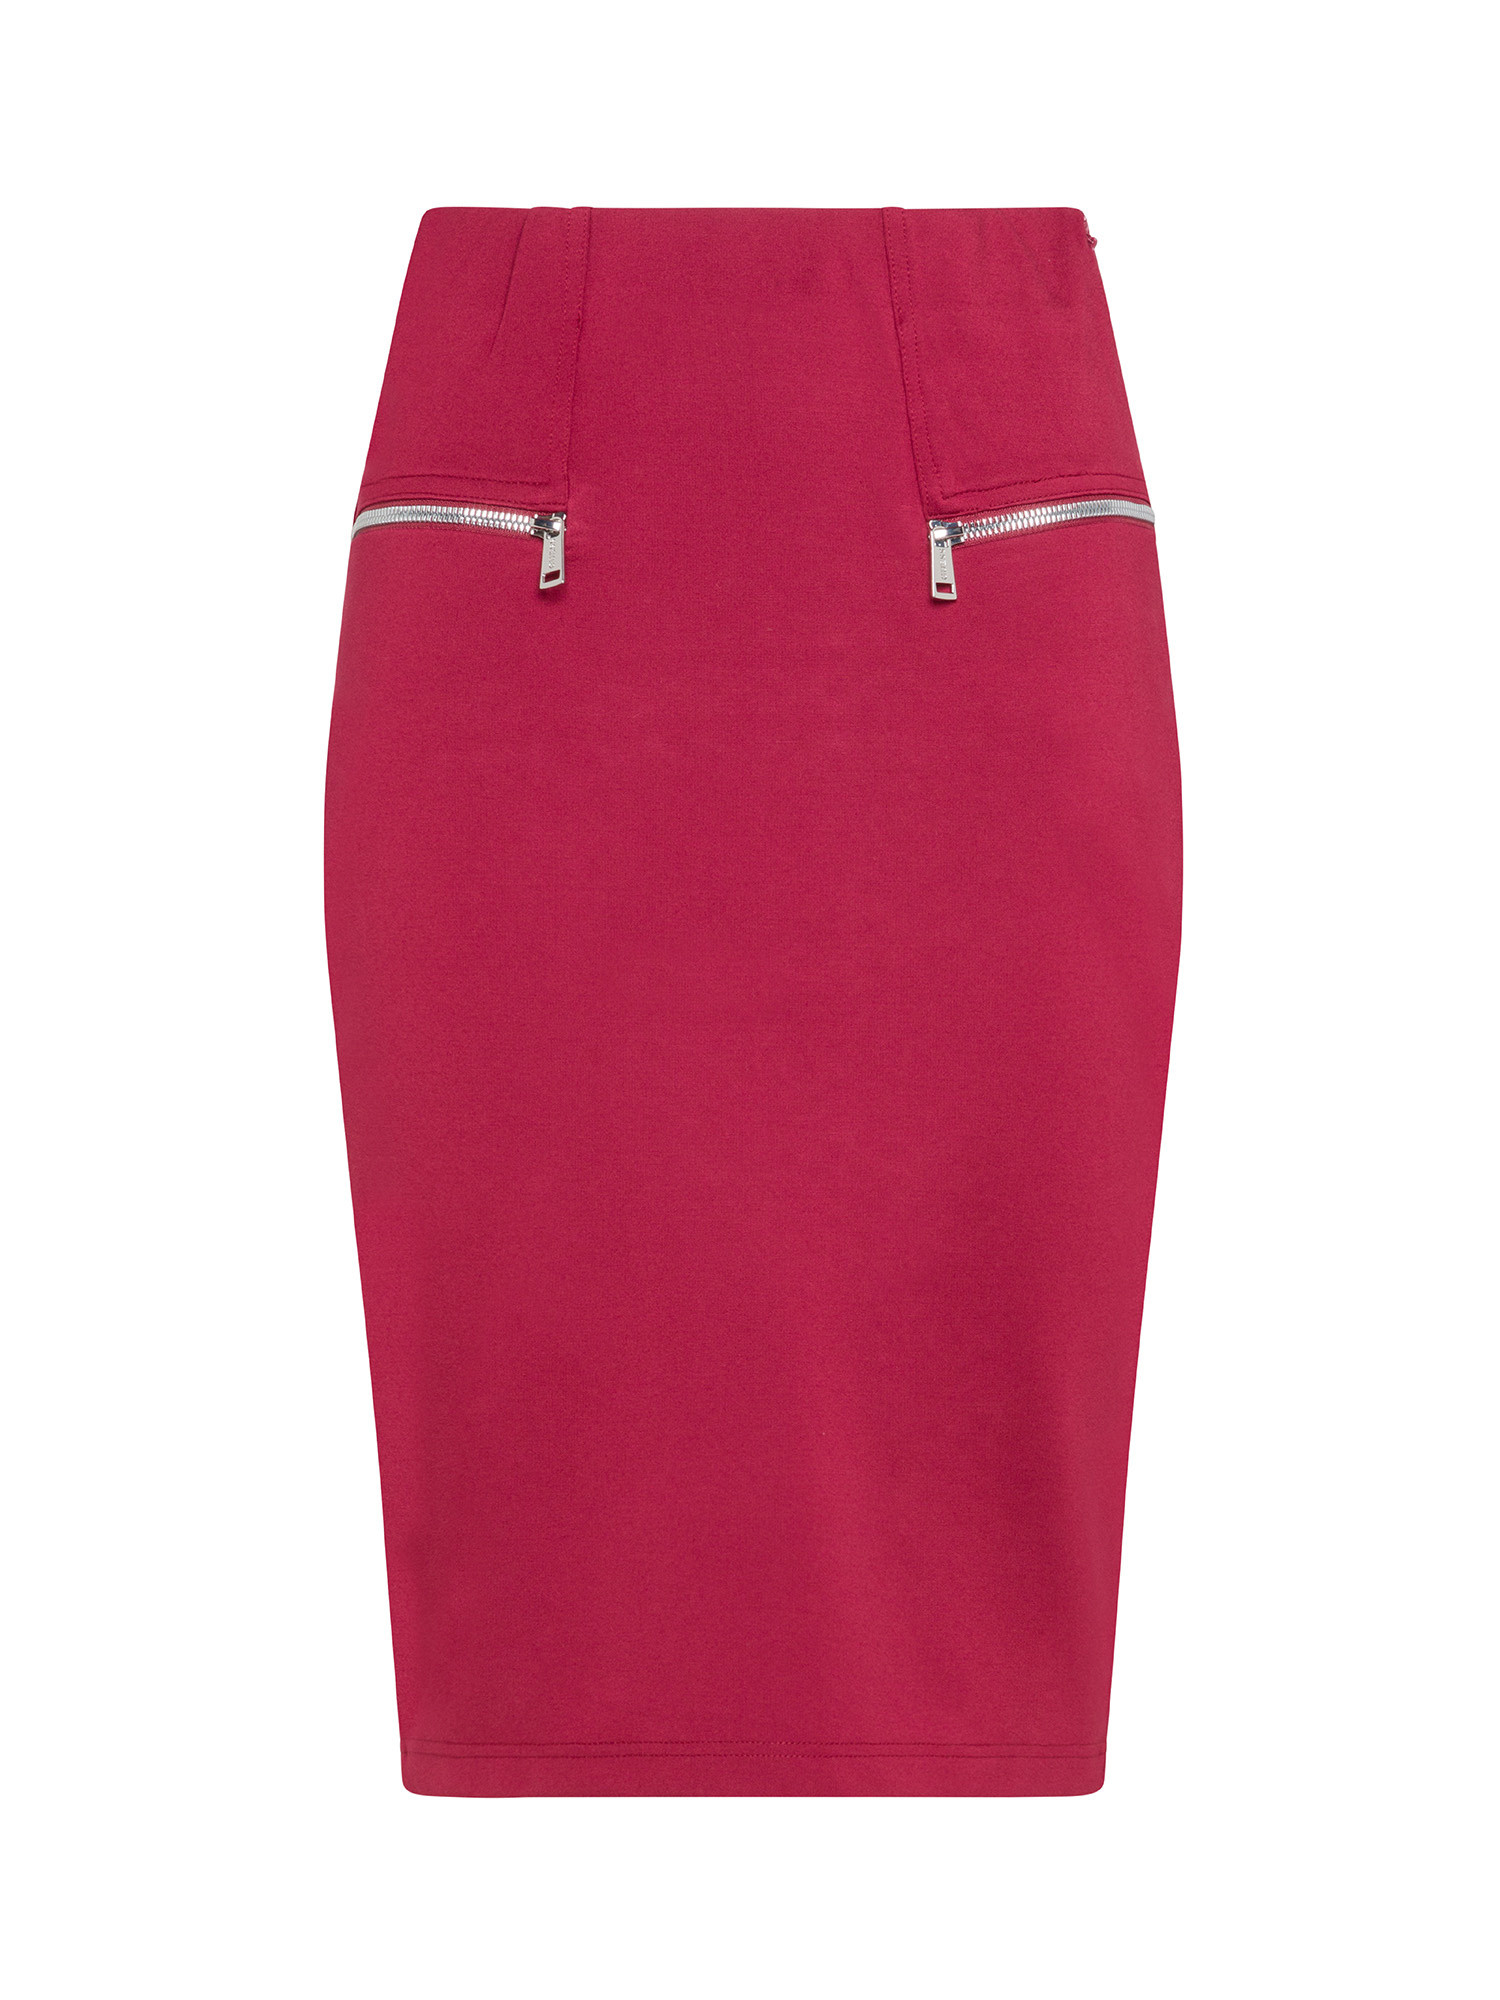 High waist skirt, Red, large image number 0